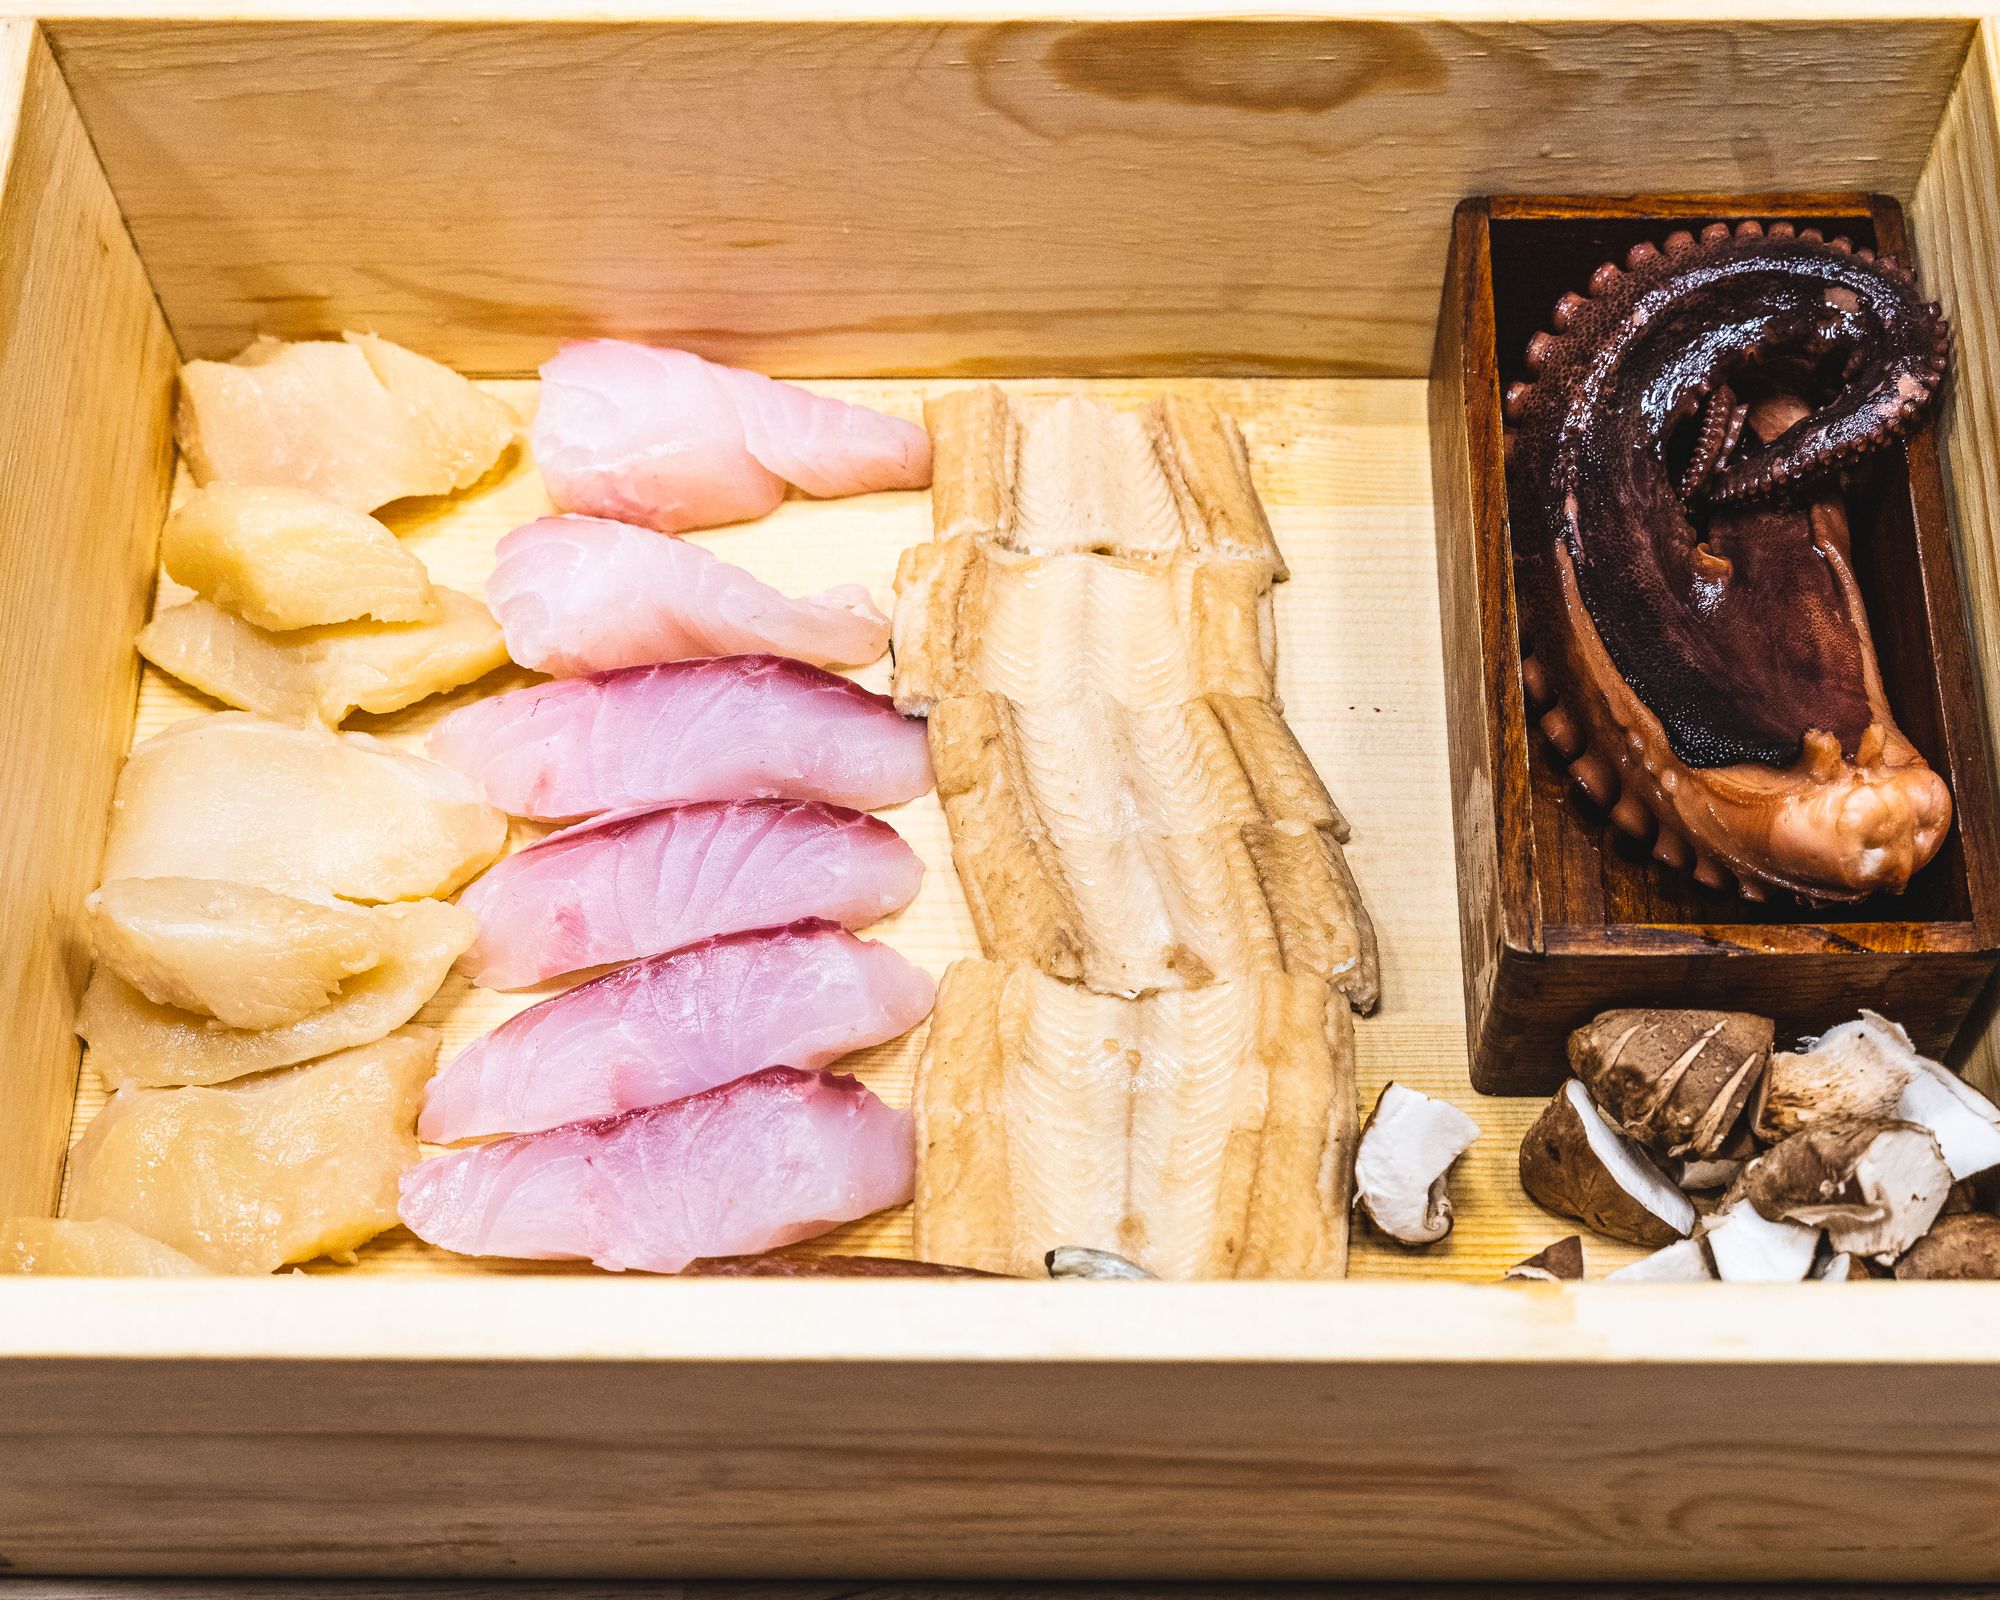 Wooden box with various cuts of fish and octopus inside